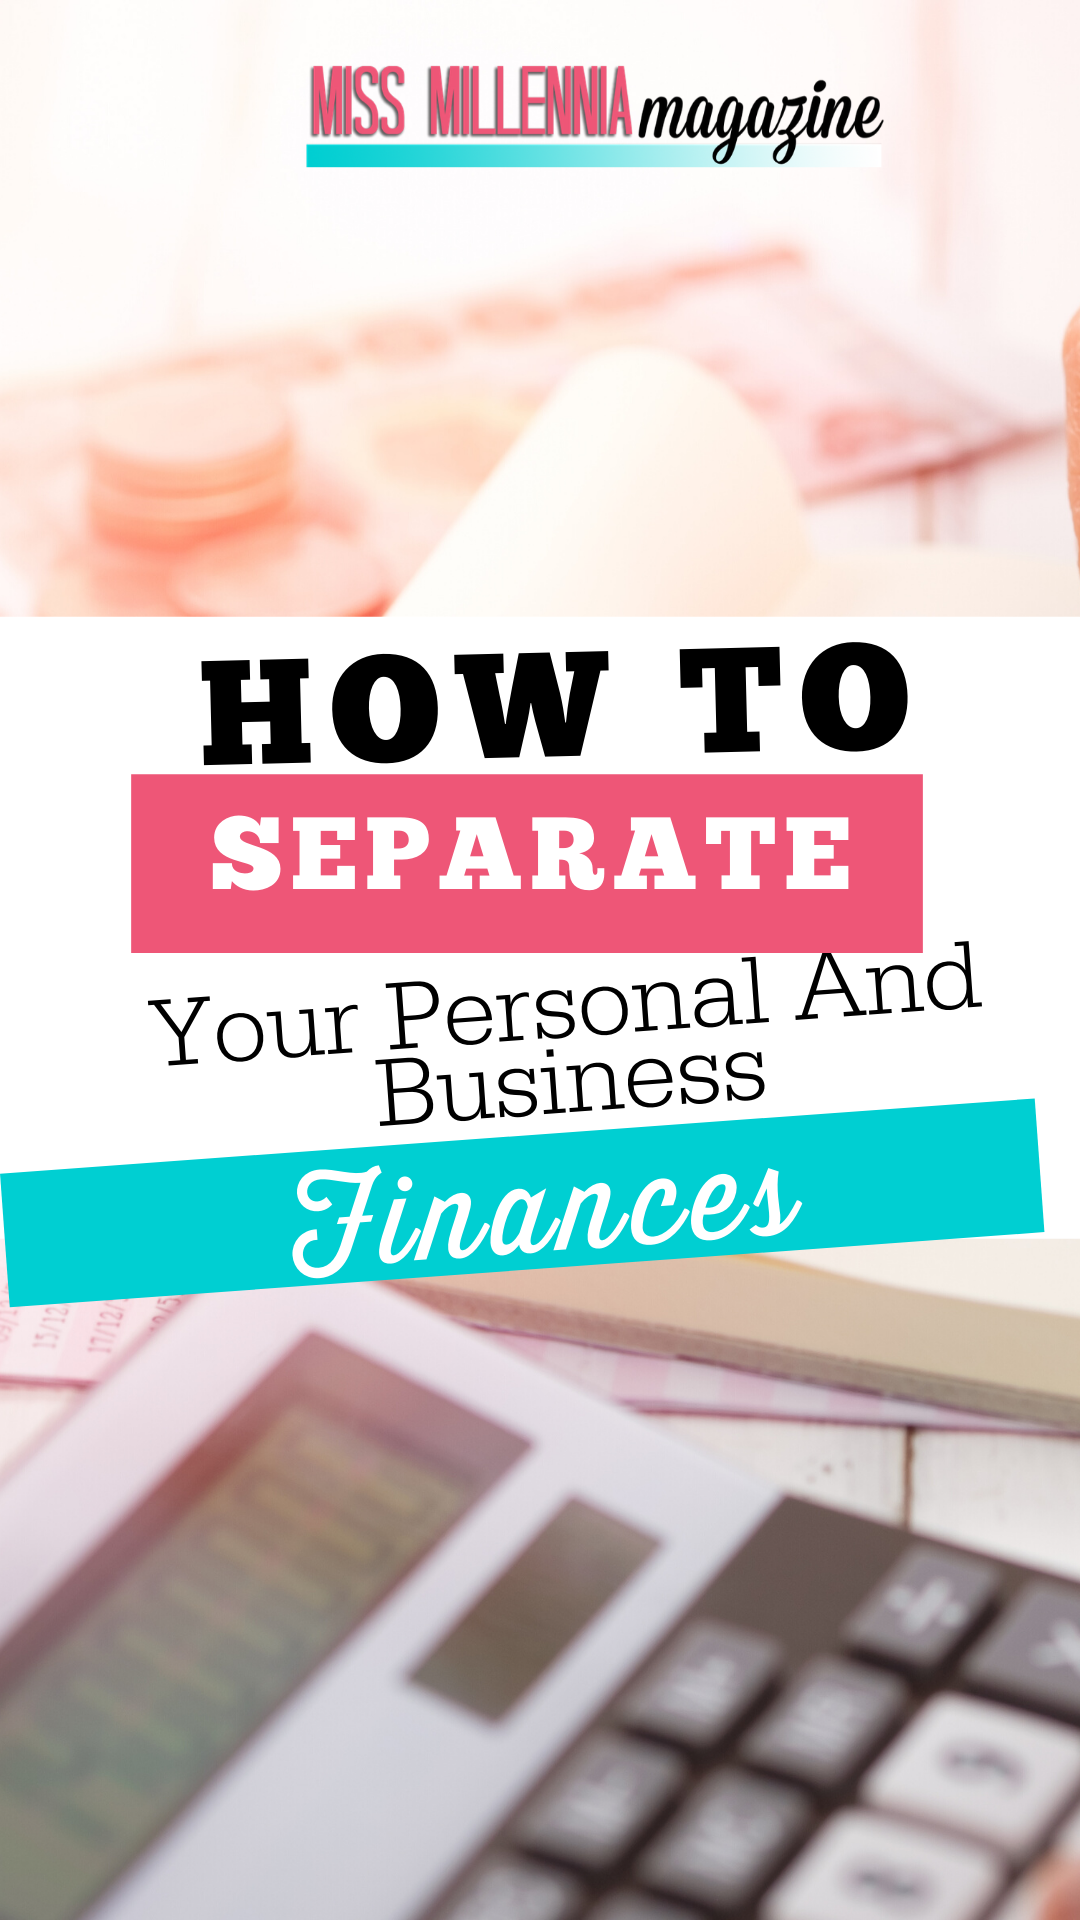 How To Separate Your Personal and Business Finances